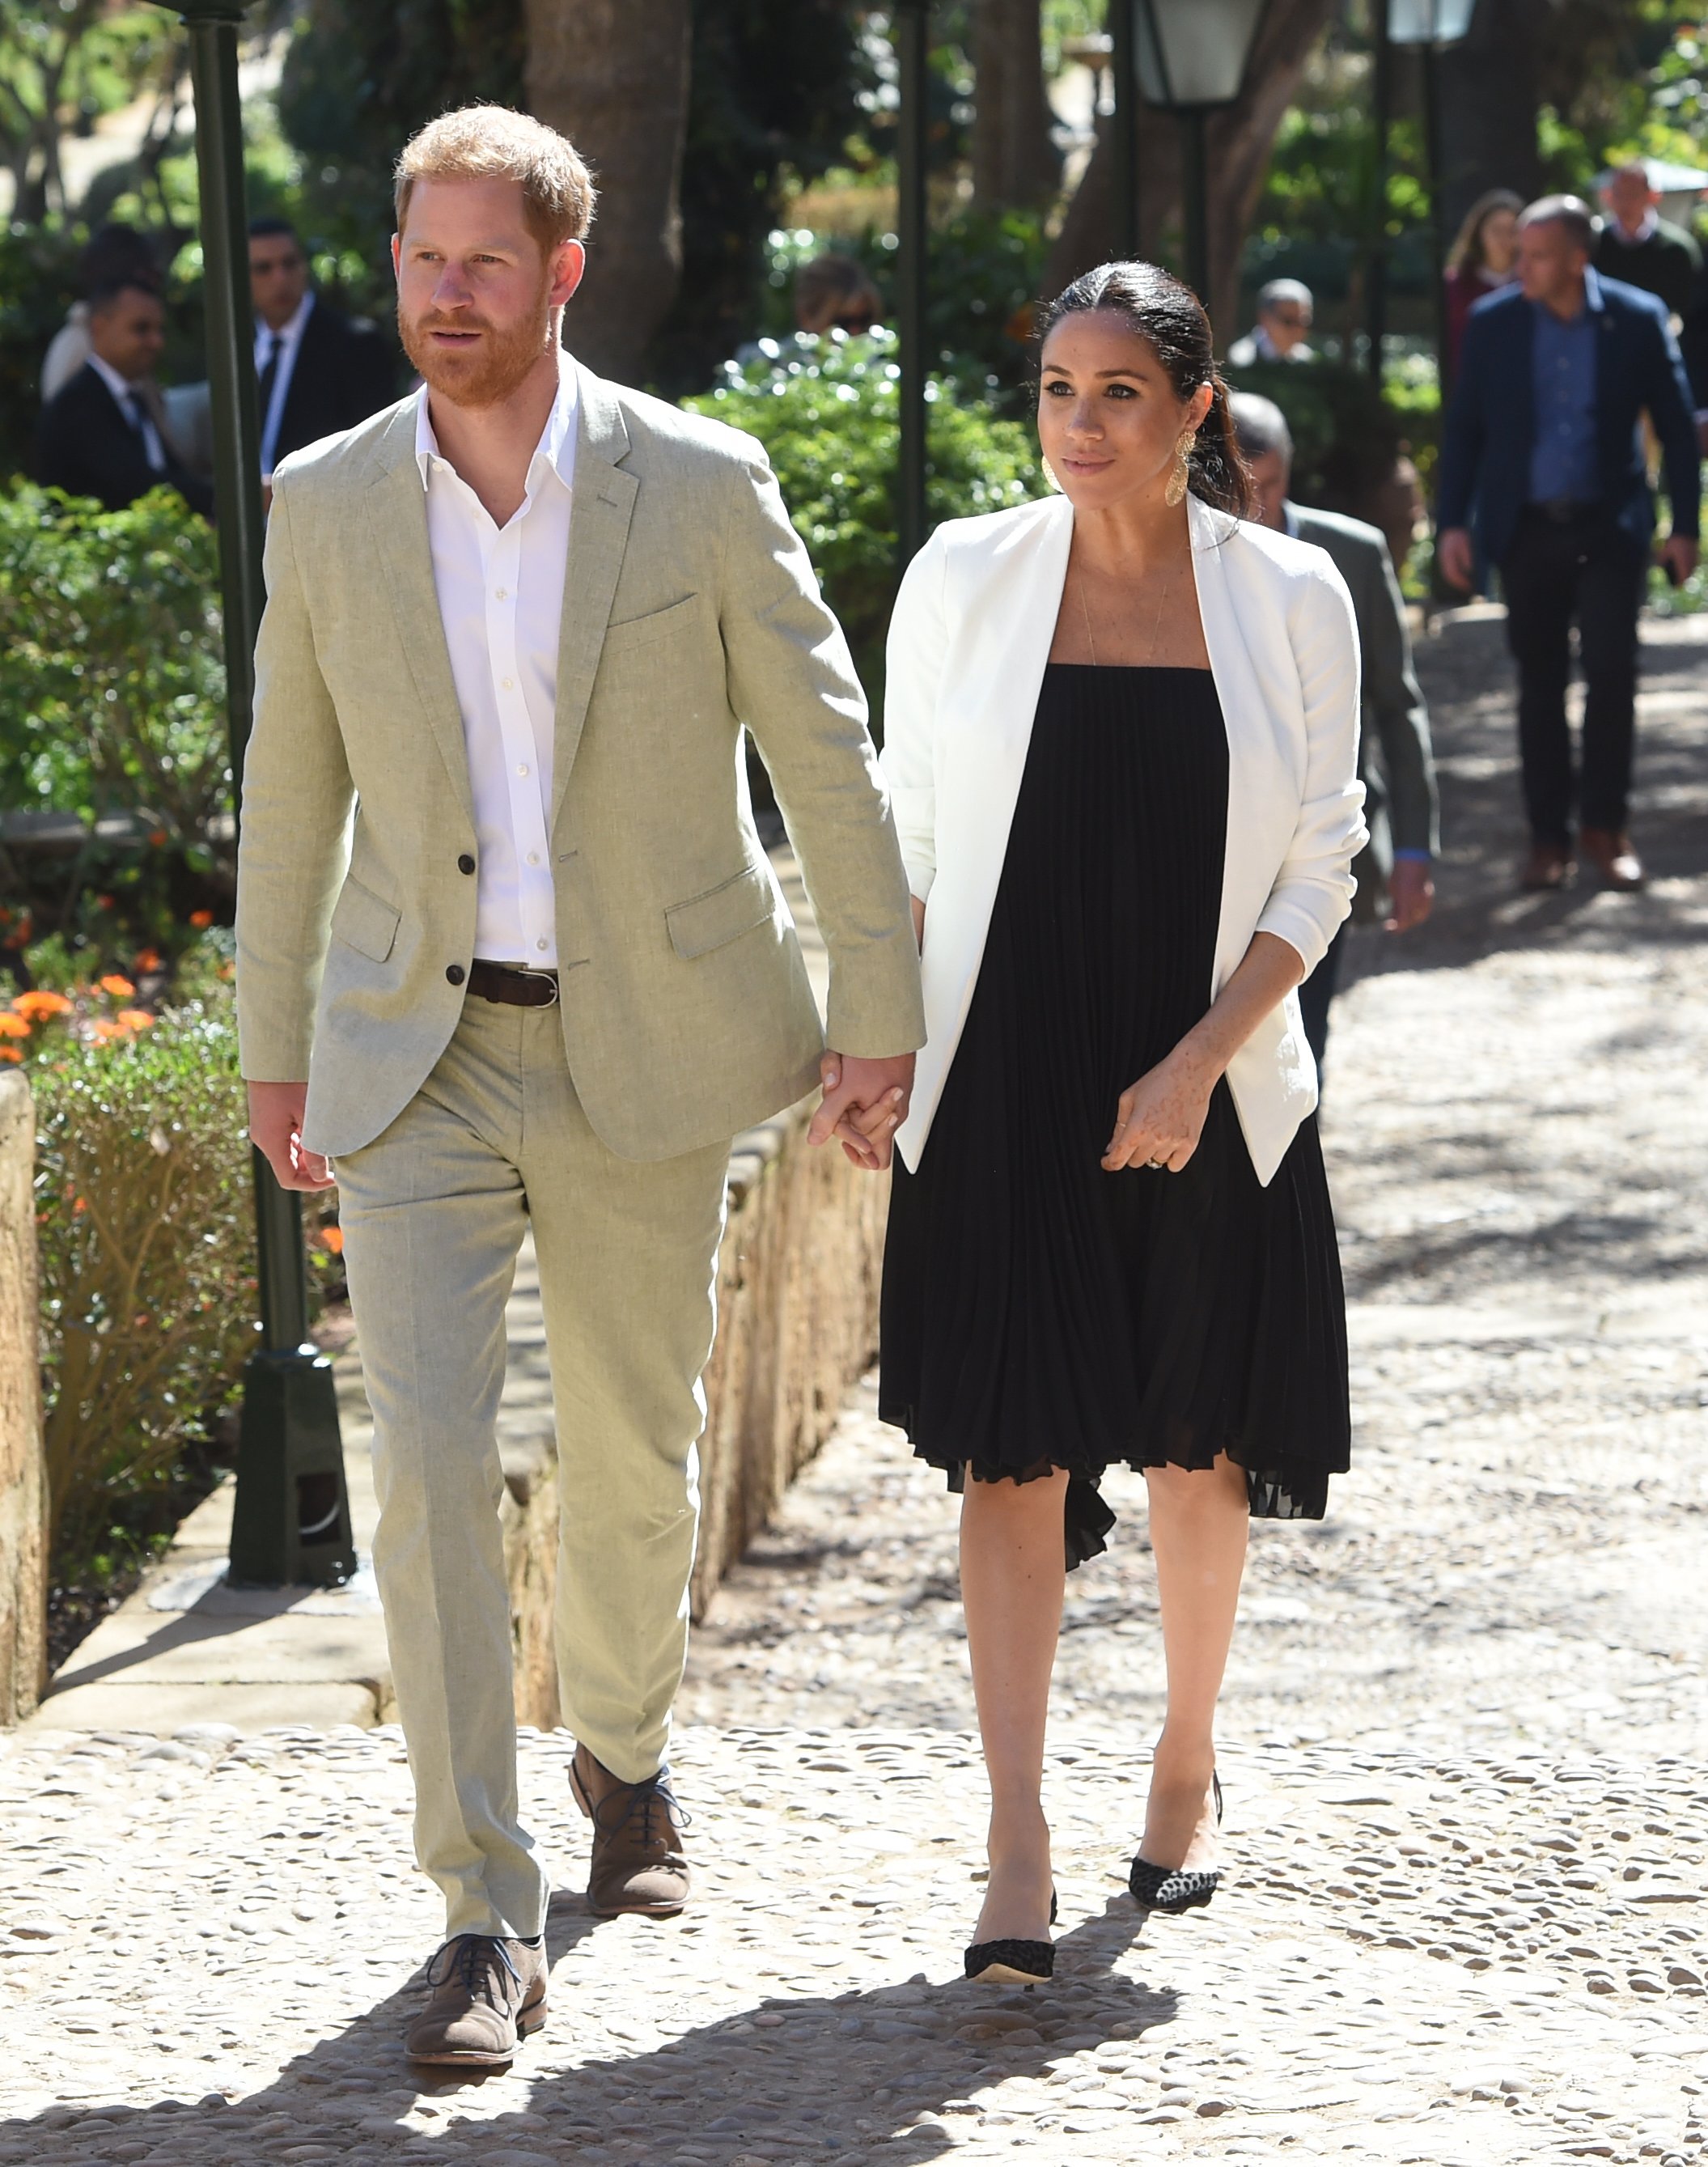 Meghan Markle and Prince Harry in Morocco 2019. | Source: Getty Images